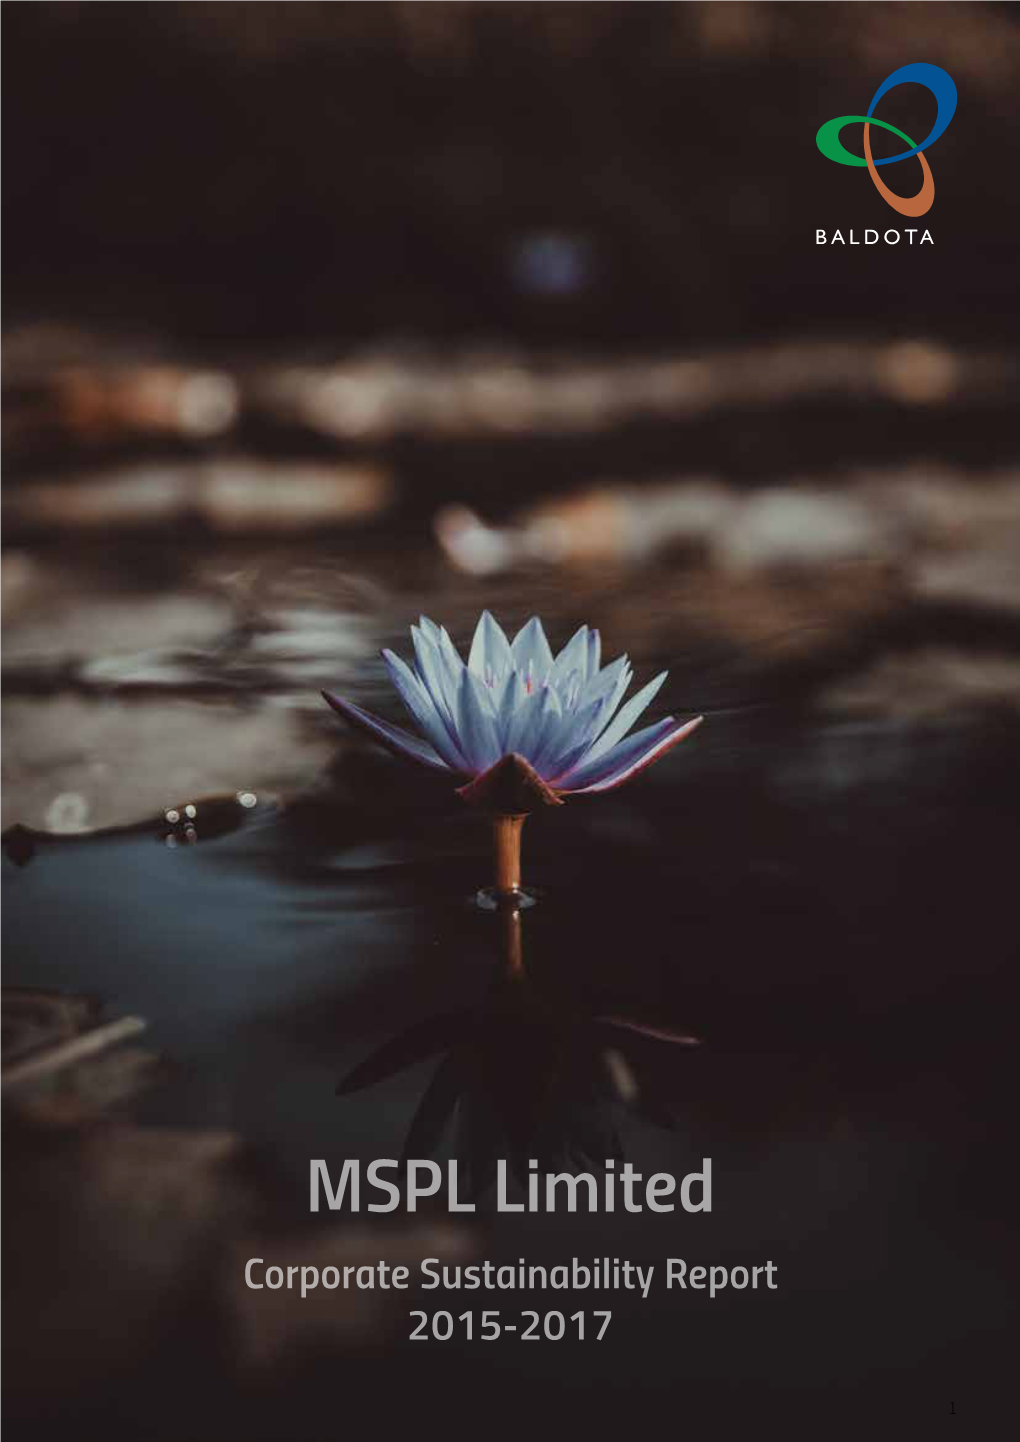 MSPL Limited Corporate Sustainability Report 2015-2017